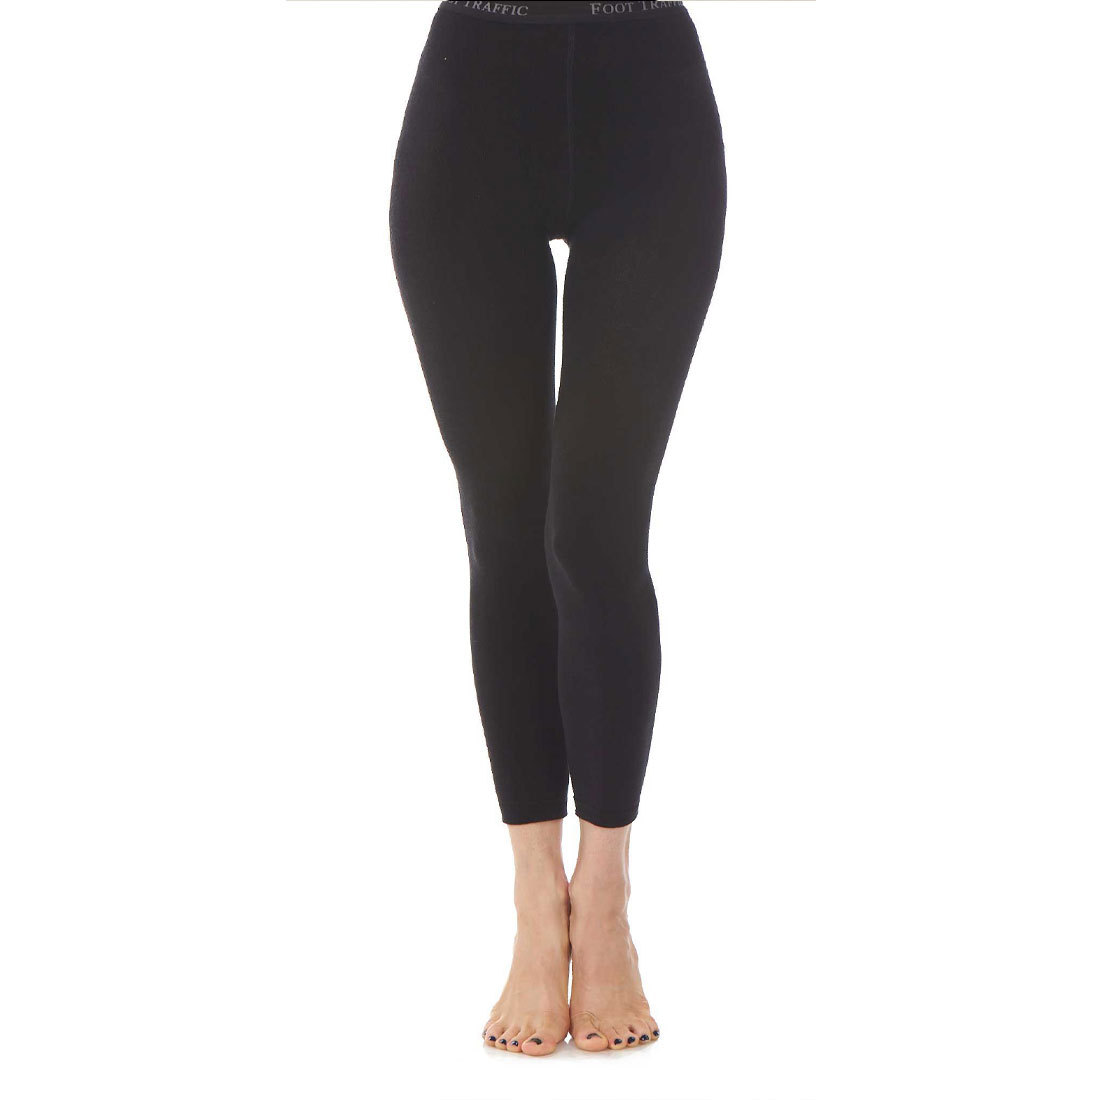 Signature Combed Cotton Leggings, Footless Tights: Foot Traffic